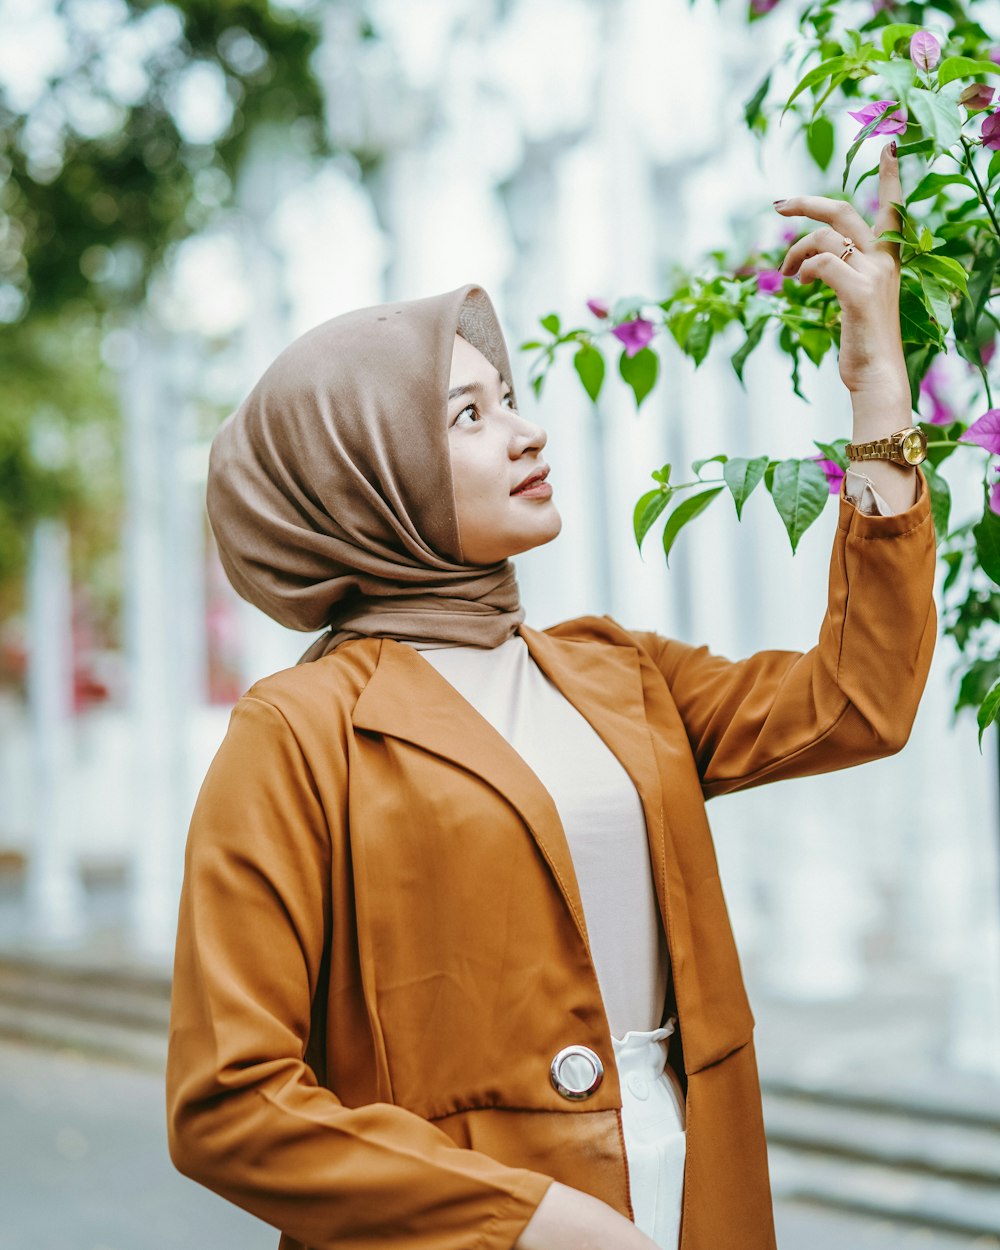 a woman in a hijab is holding a flower